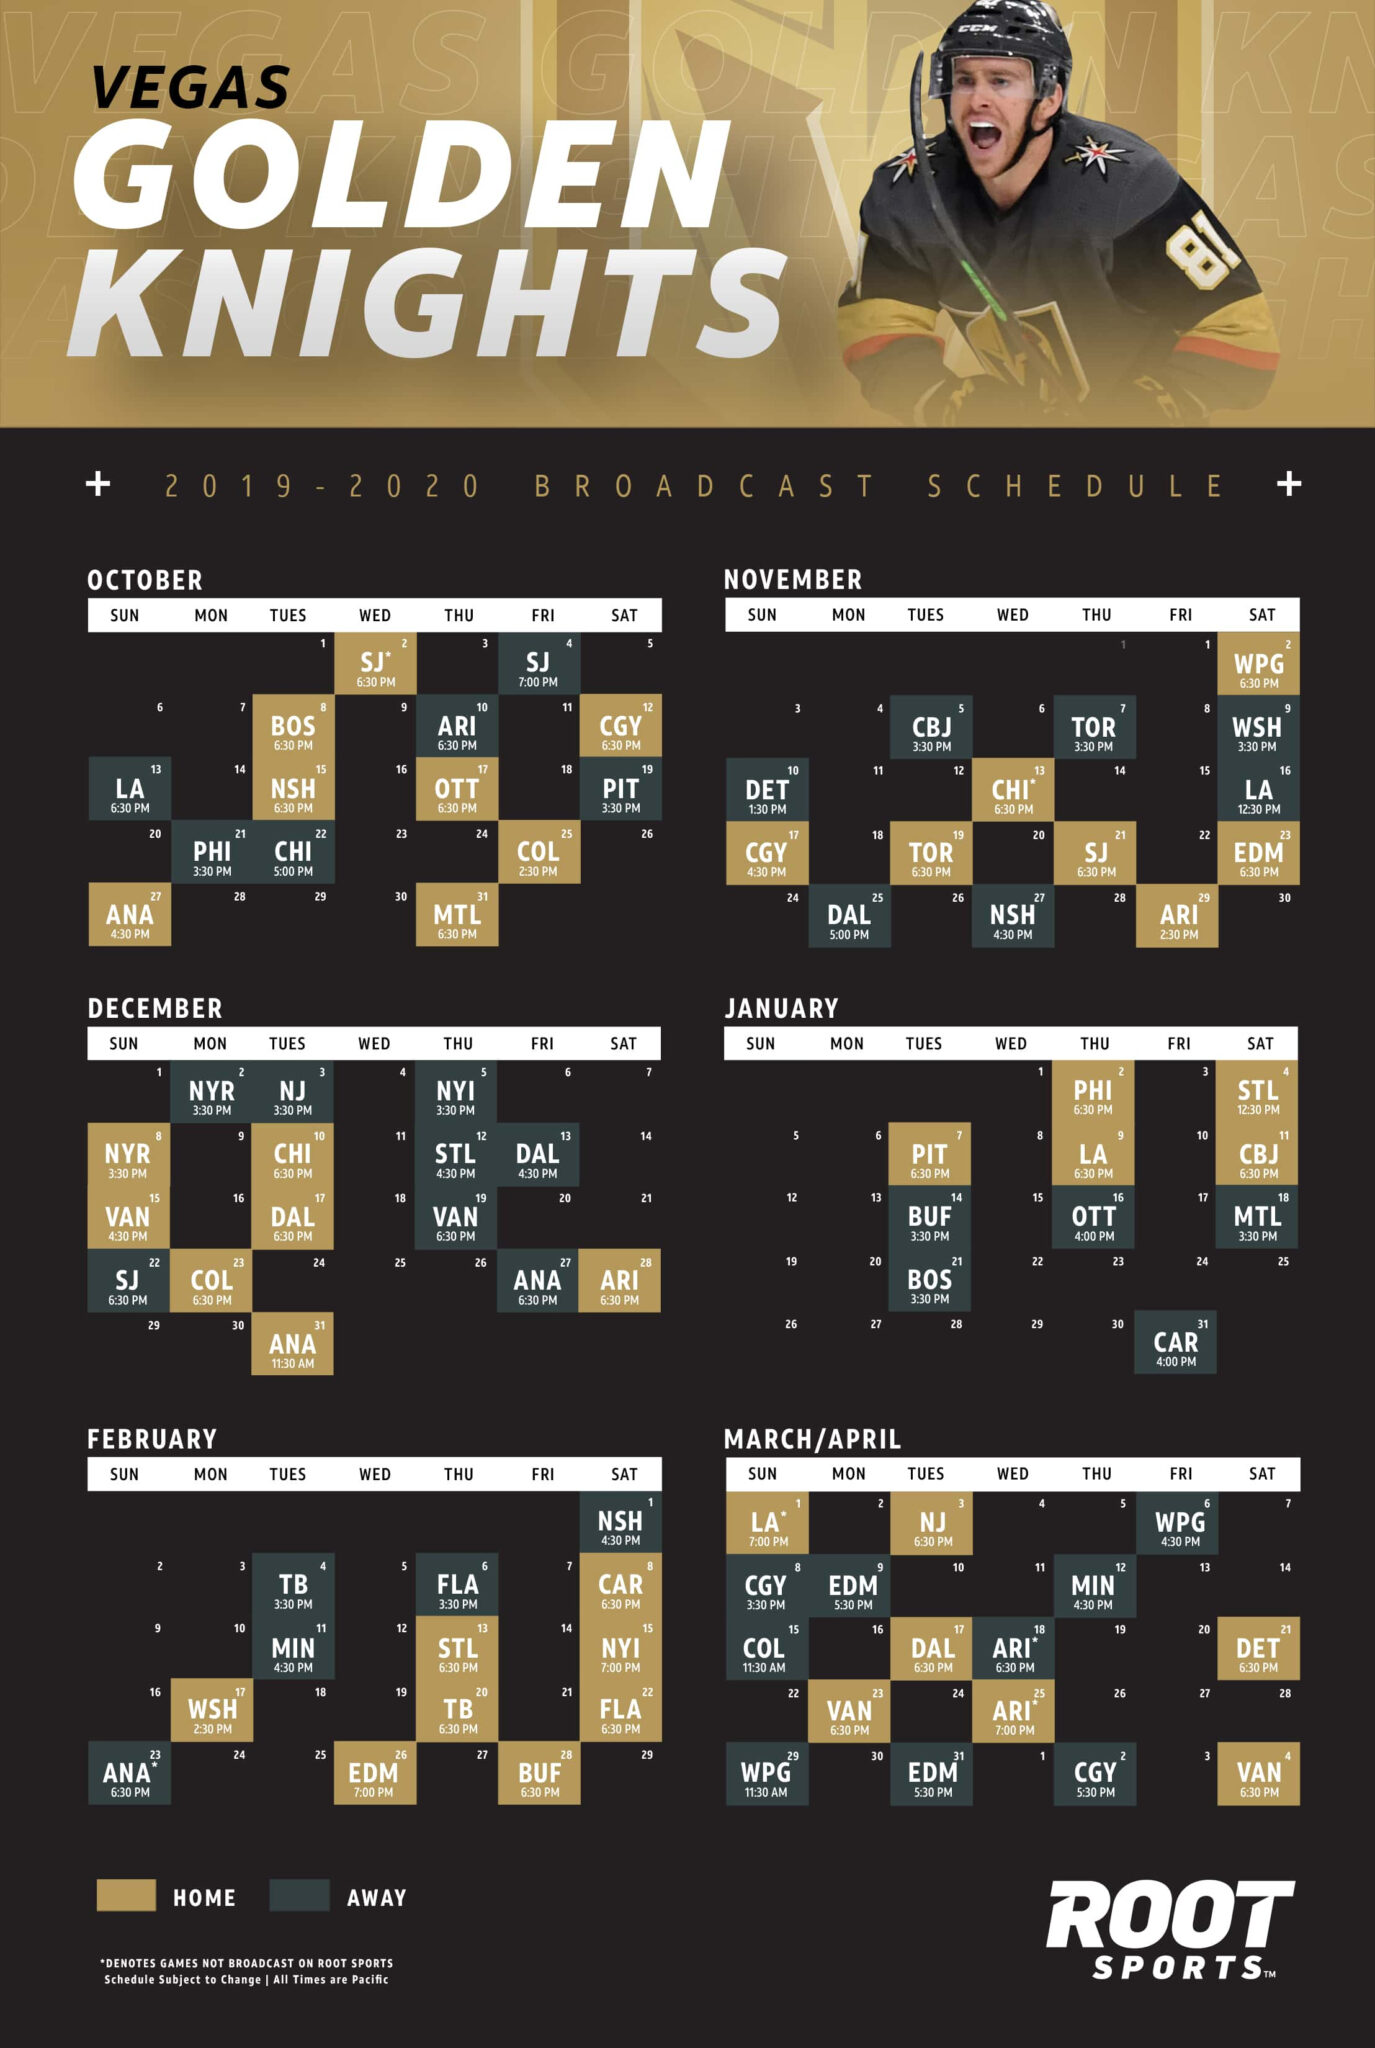 Vegas Golden Knights ROOT SPORTS Printable Schedule